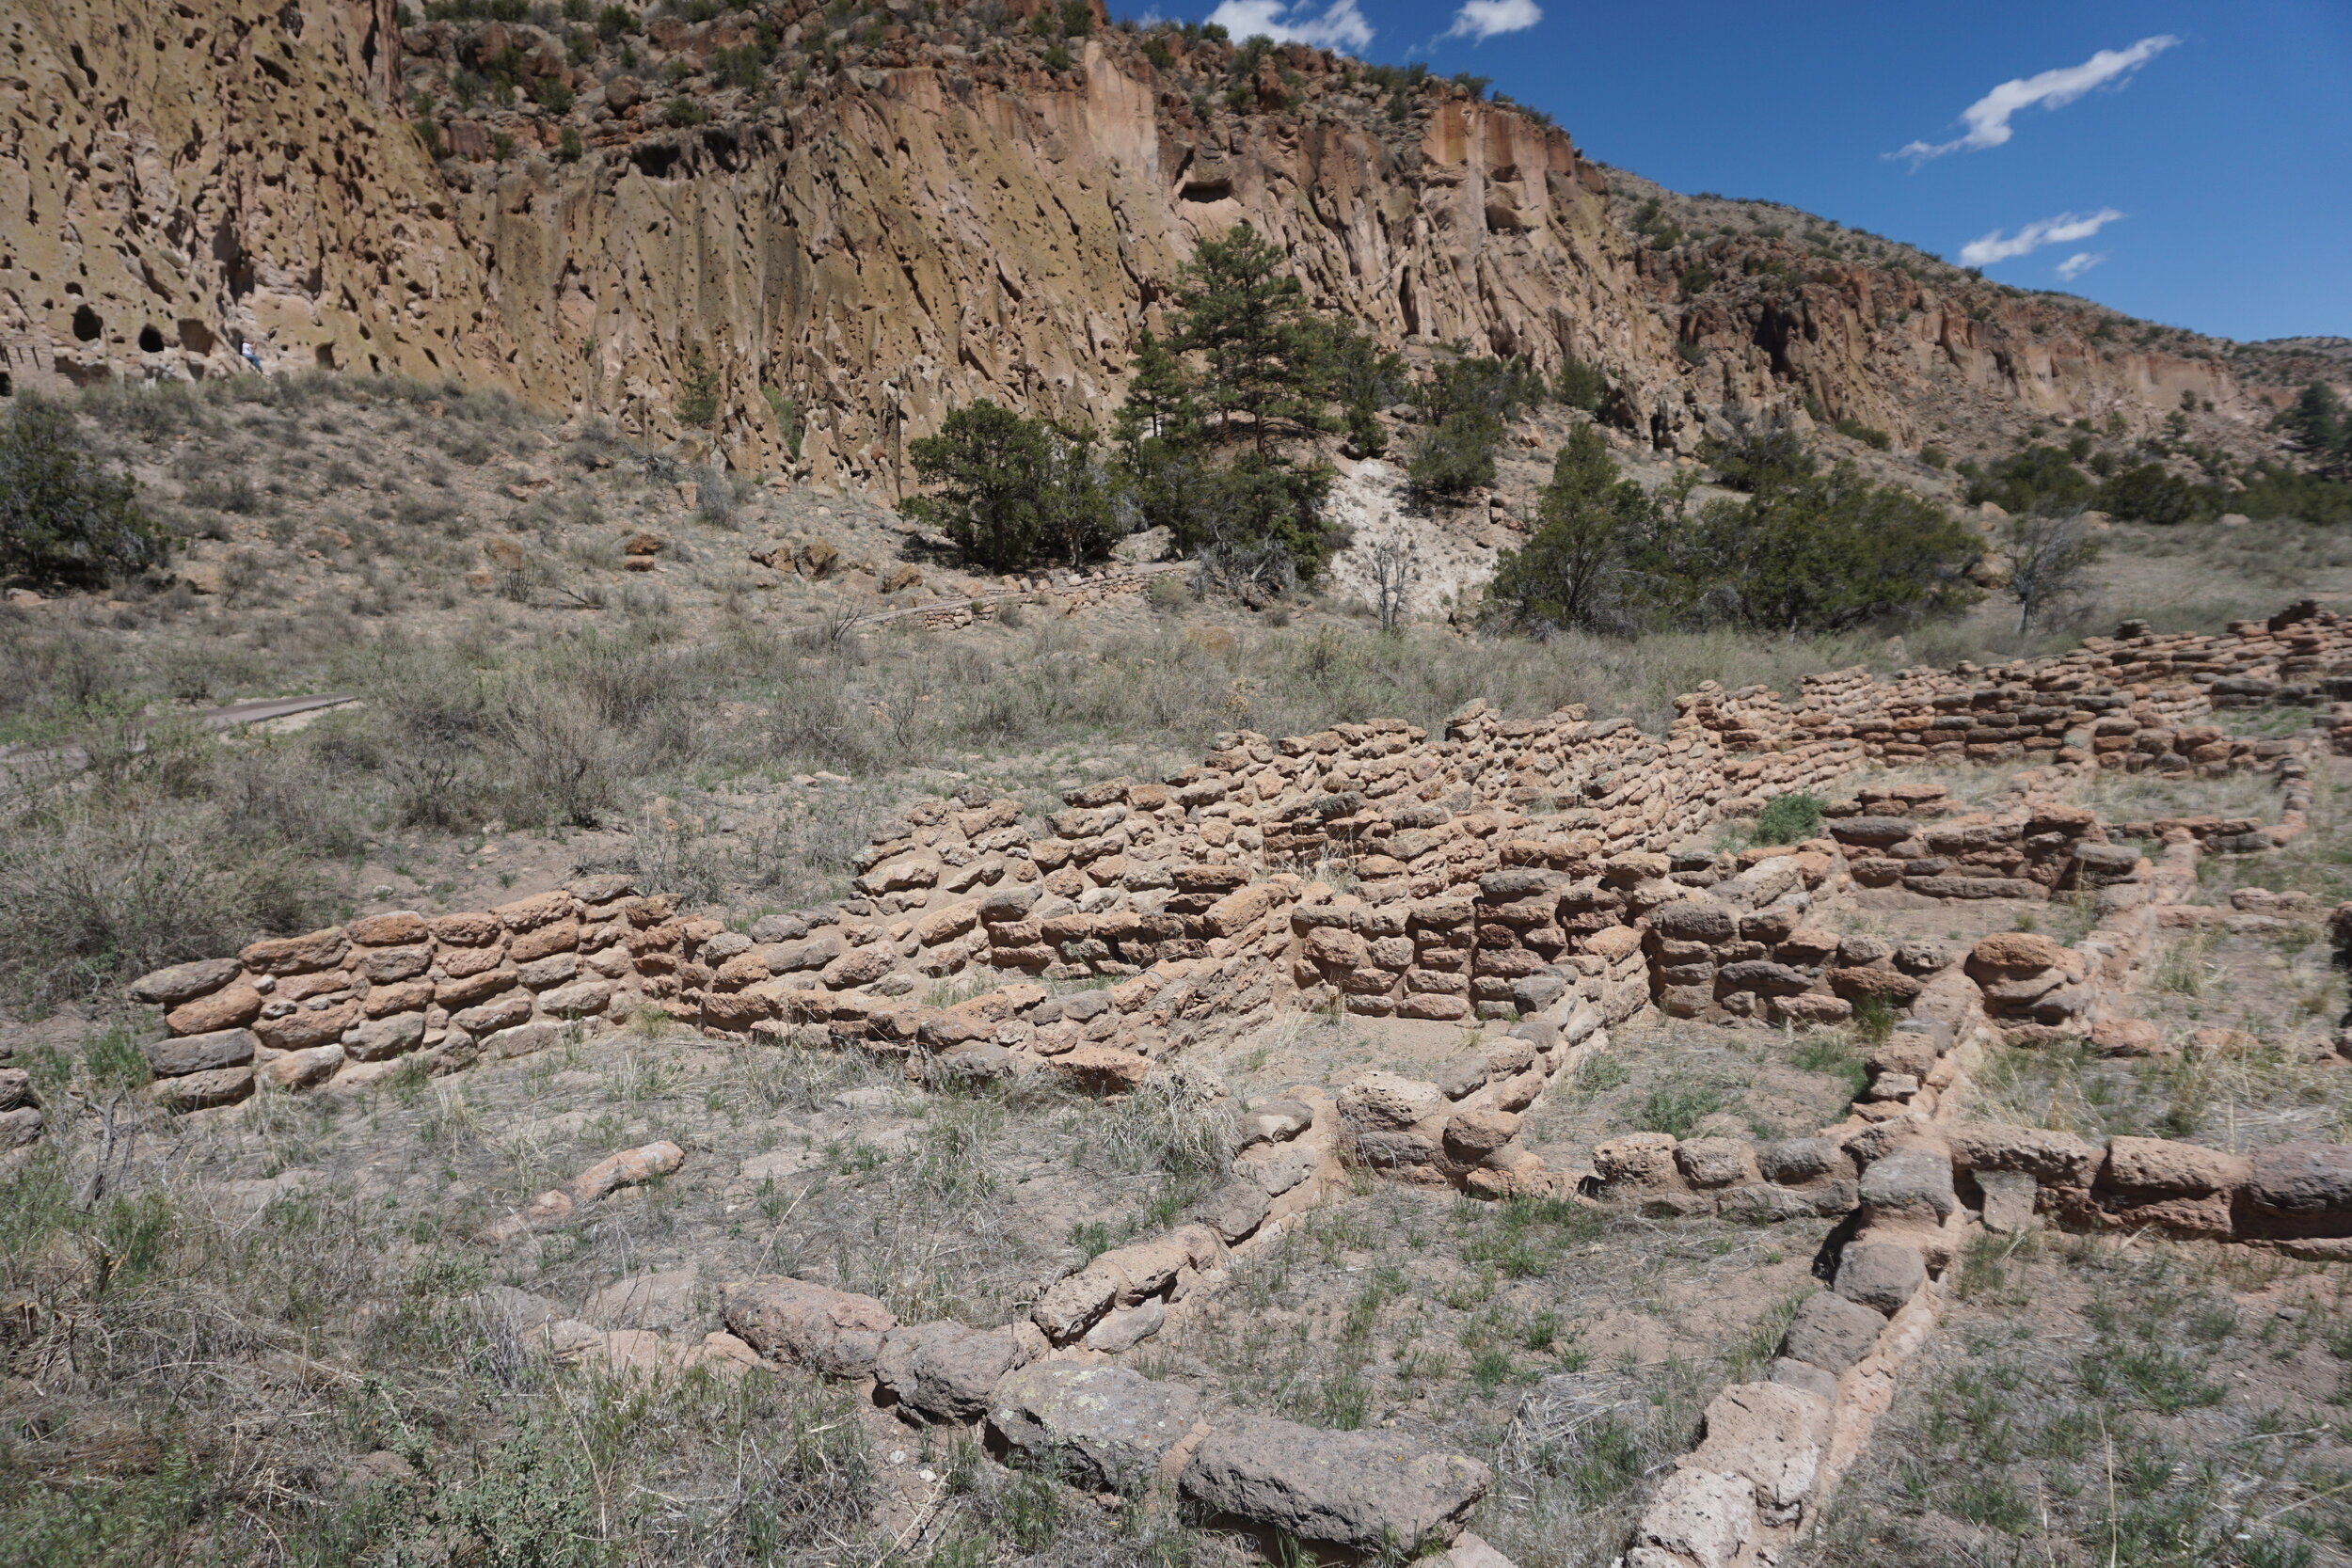 Stone ruins at Bandelier National Monument